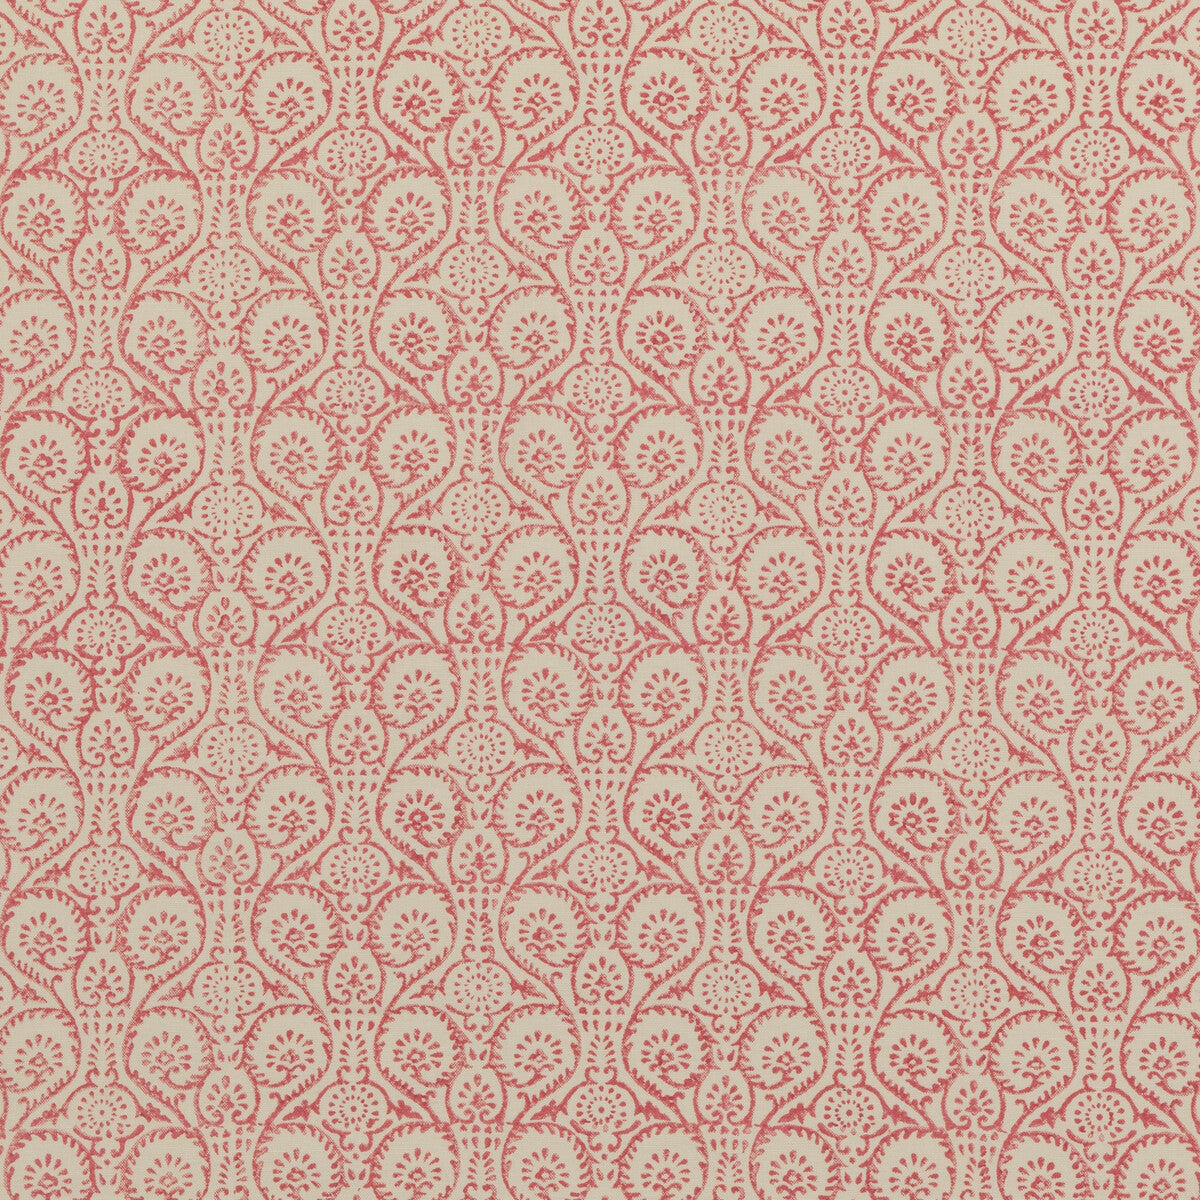 Pollen Trail fabric in fuchsia color - pattern PP50481.6.0 - by Baker Lifestyle in the Block Party collection